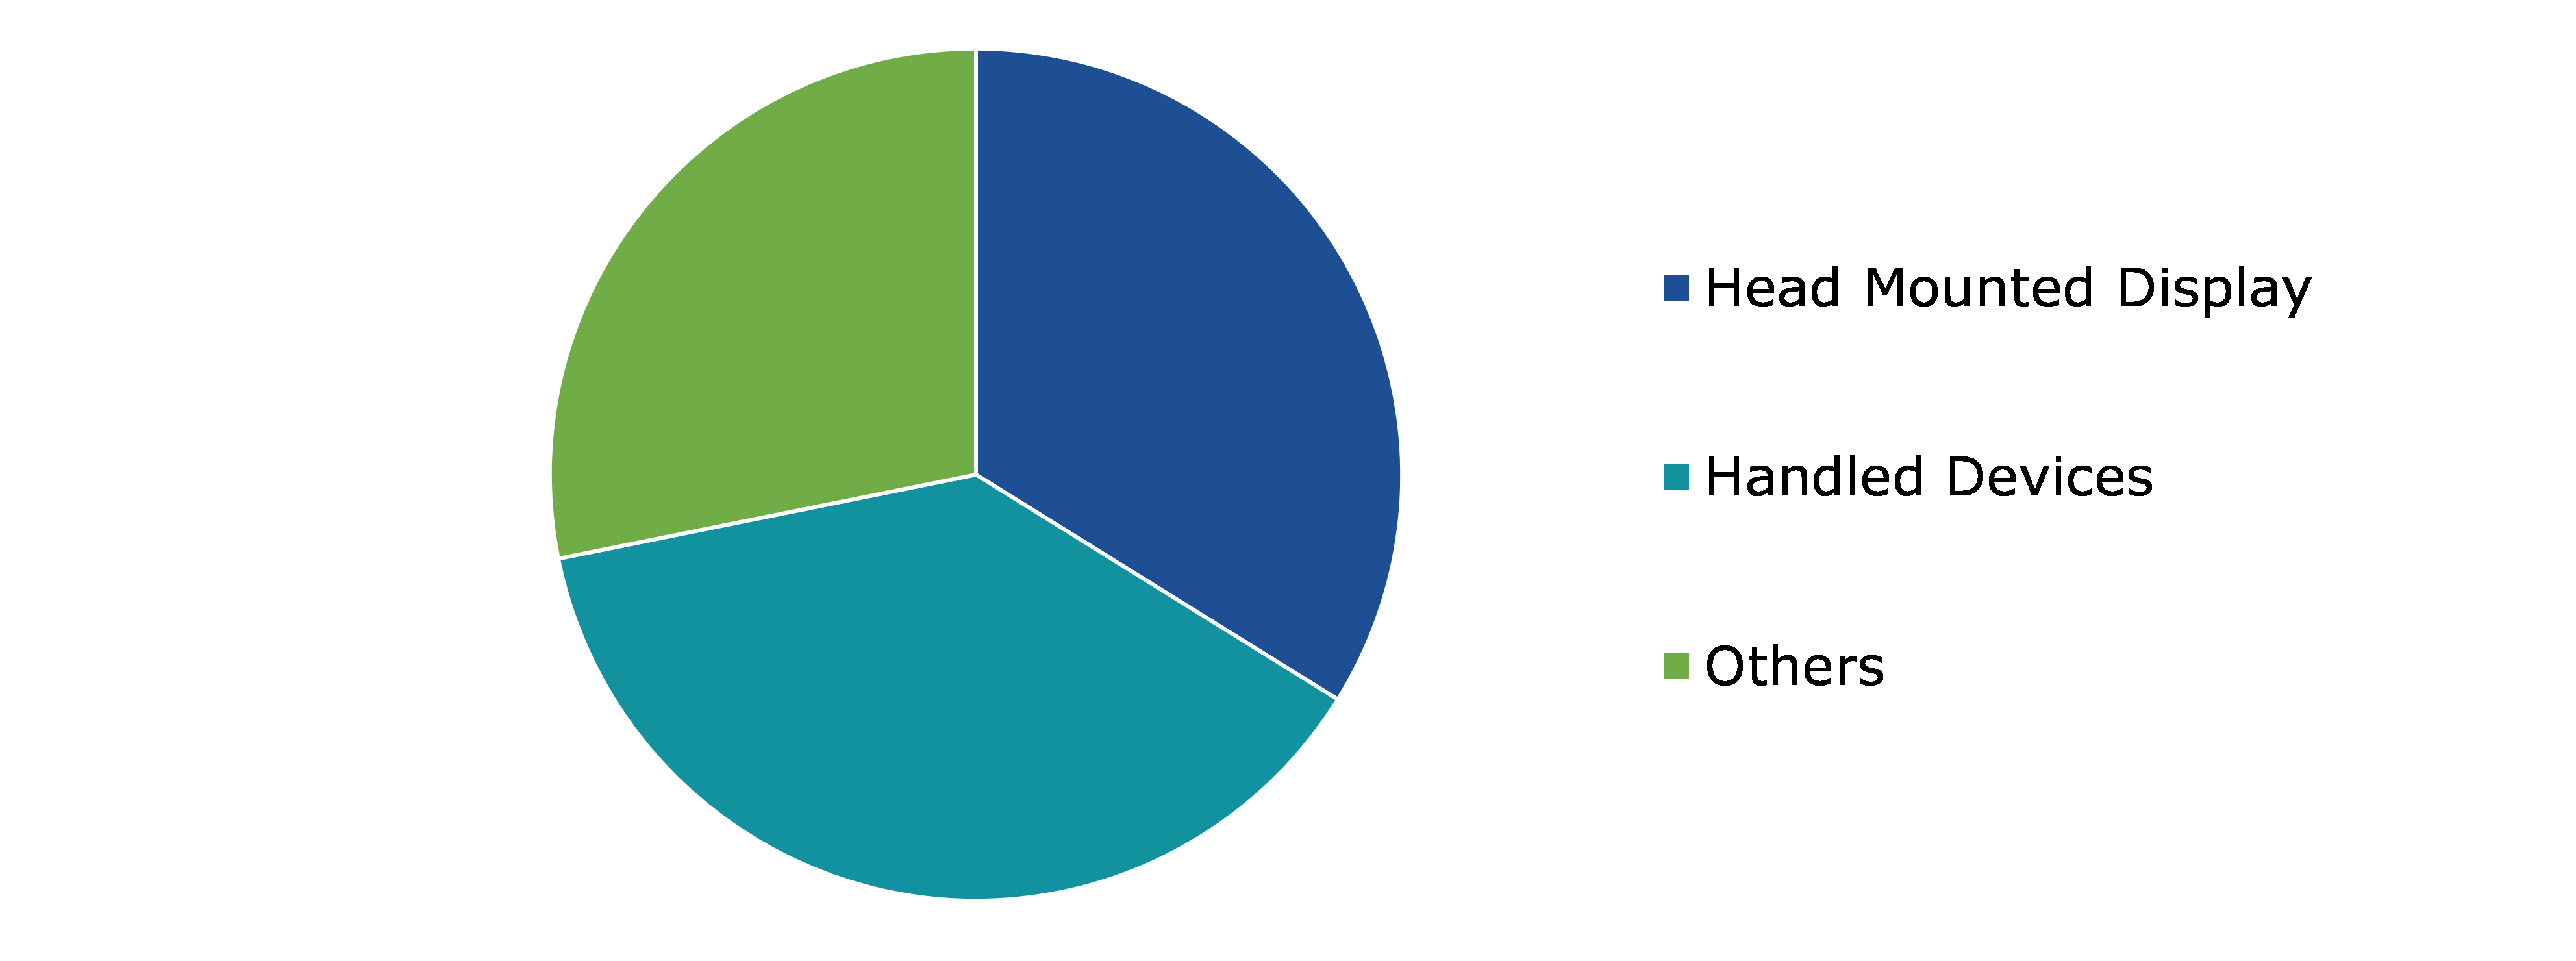 Global Augmented Reality Market, by Device Type	